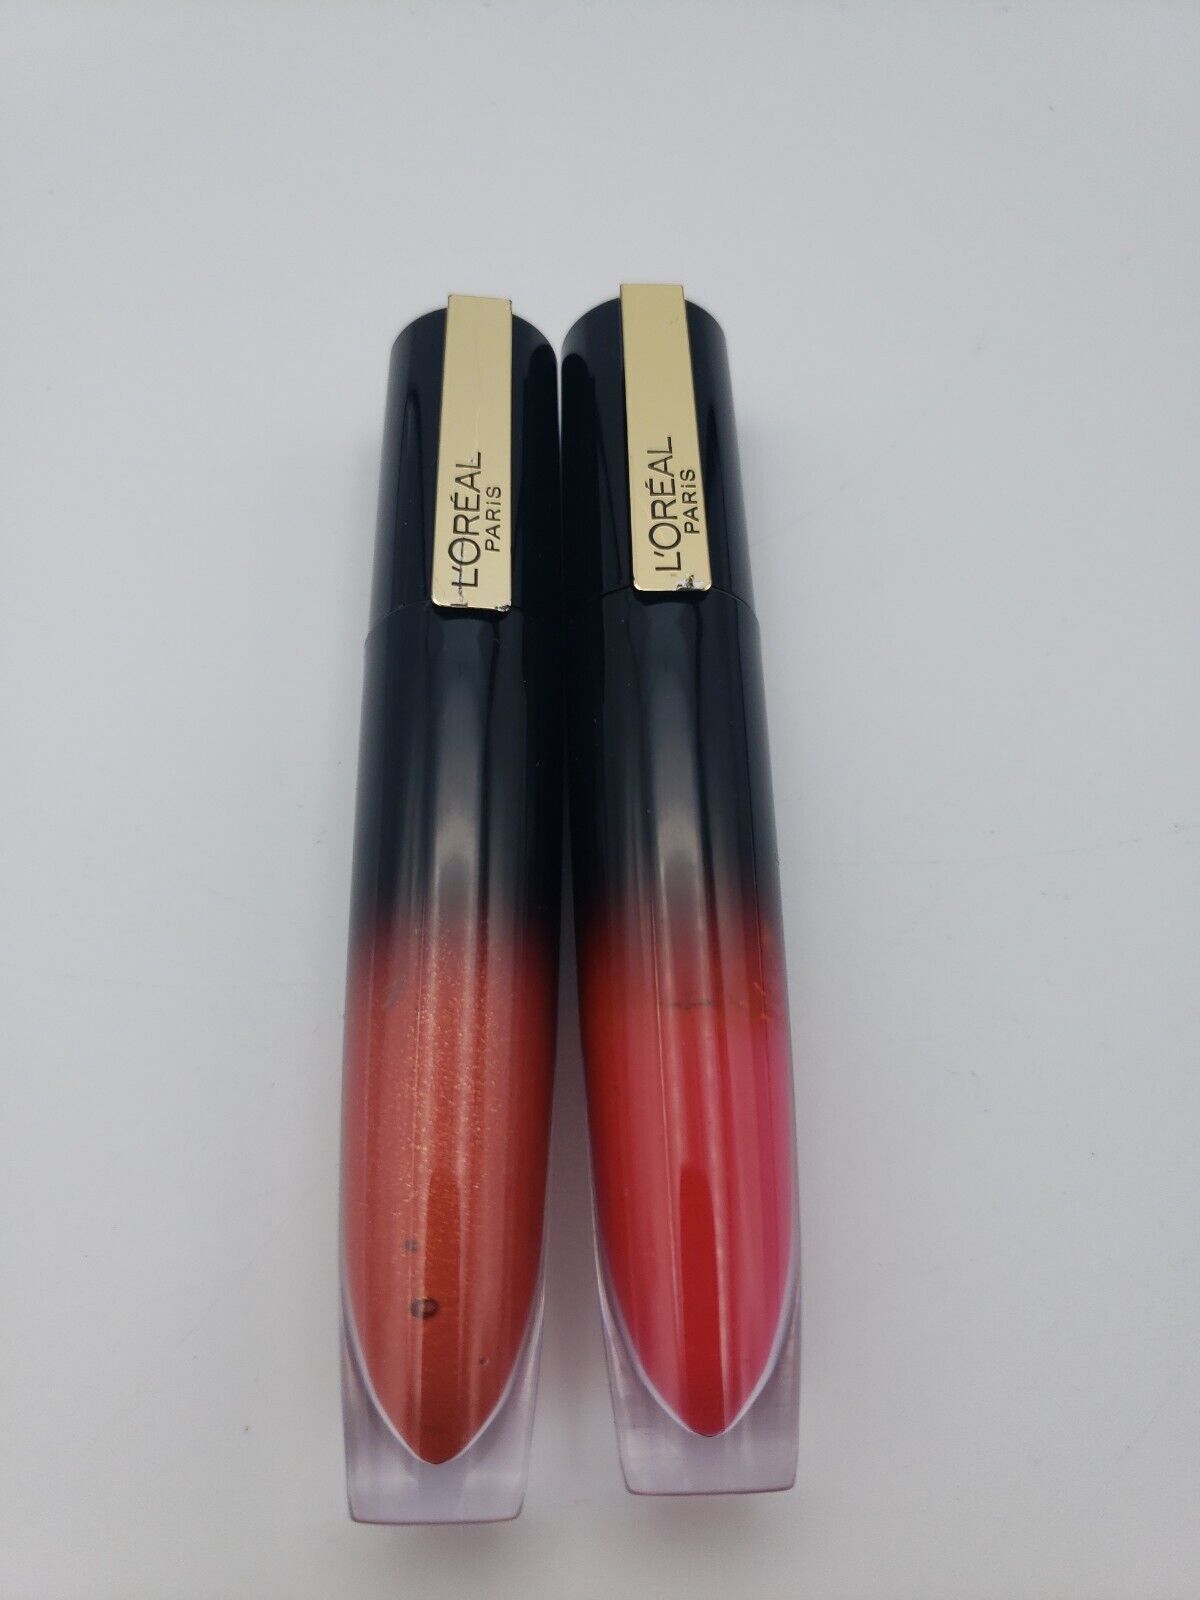 Lot of 2! L'Oreal Paris Rouge Signature Lip Stain 1 fl oz #311 and #315! Sealed! - £10.74 GBP